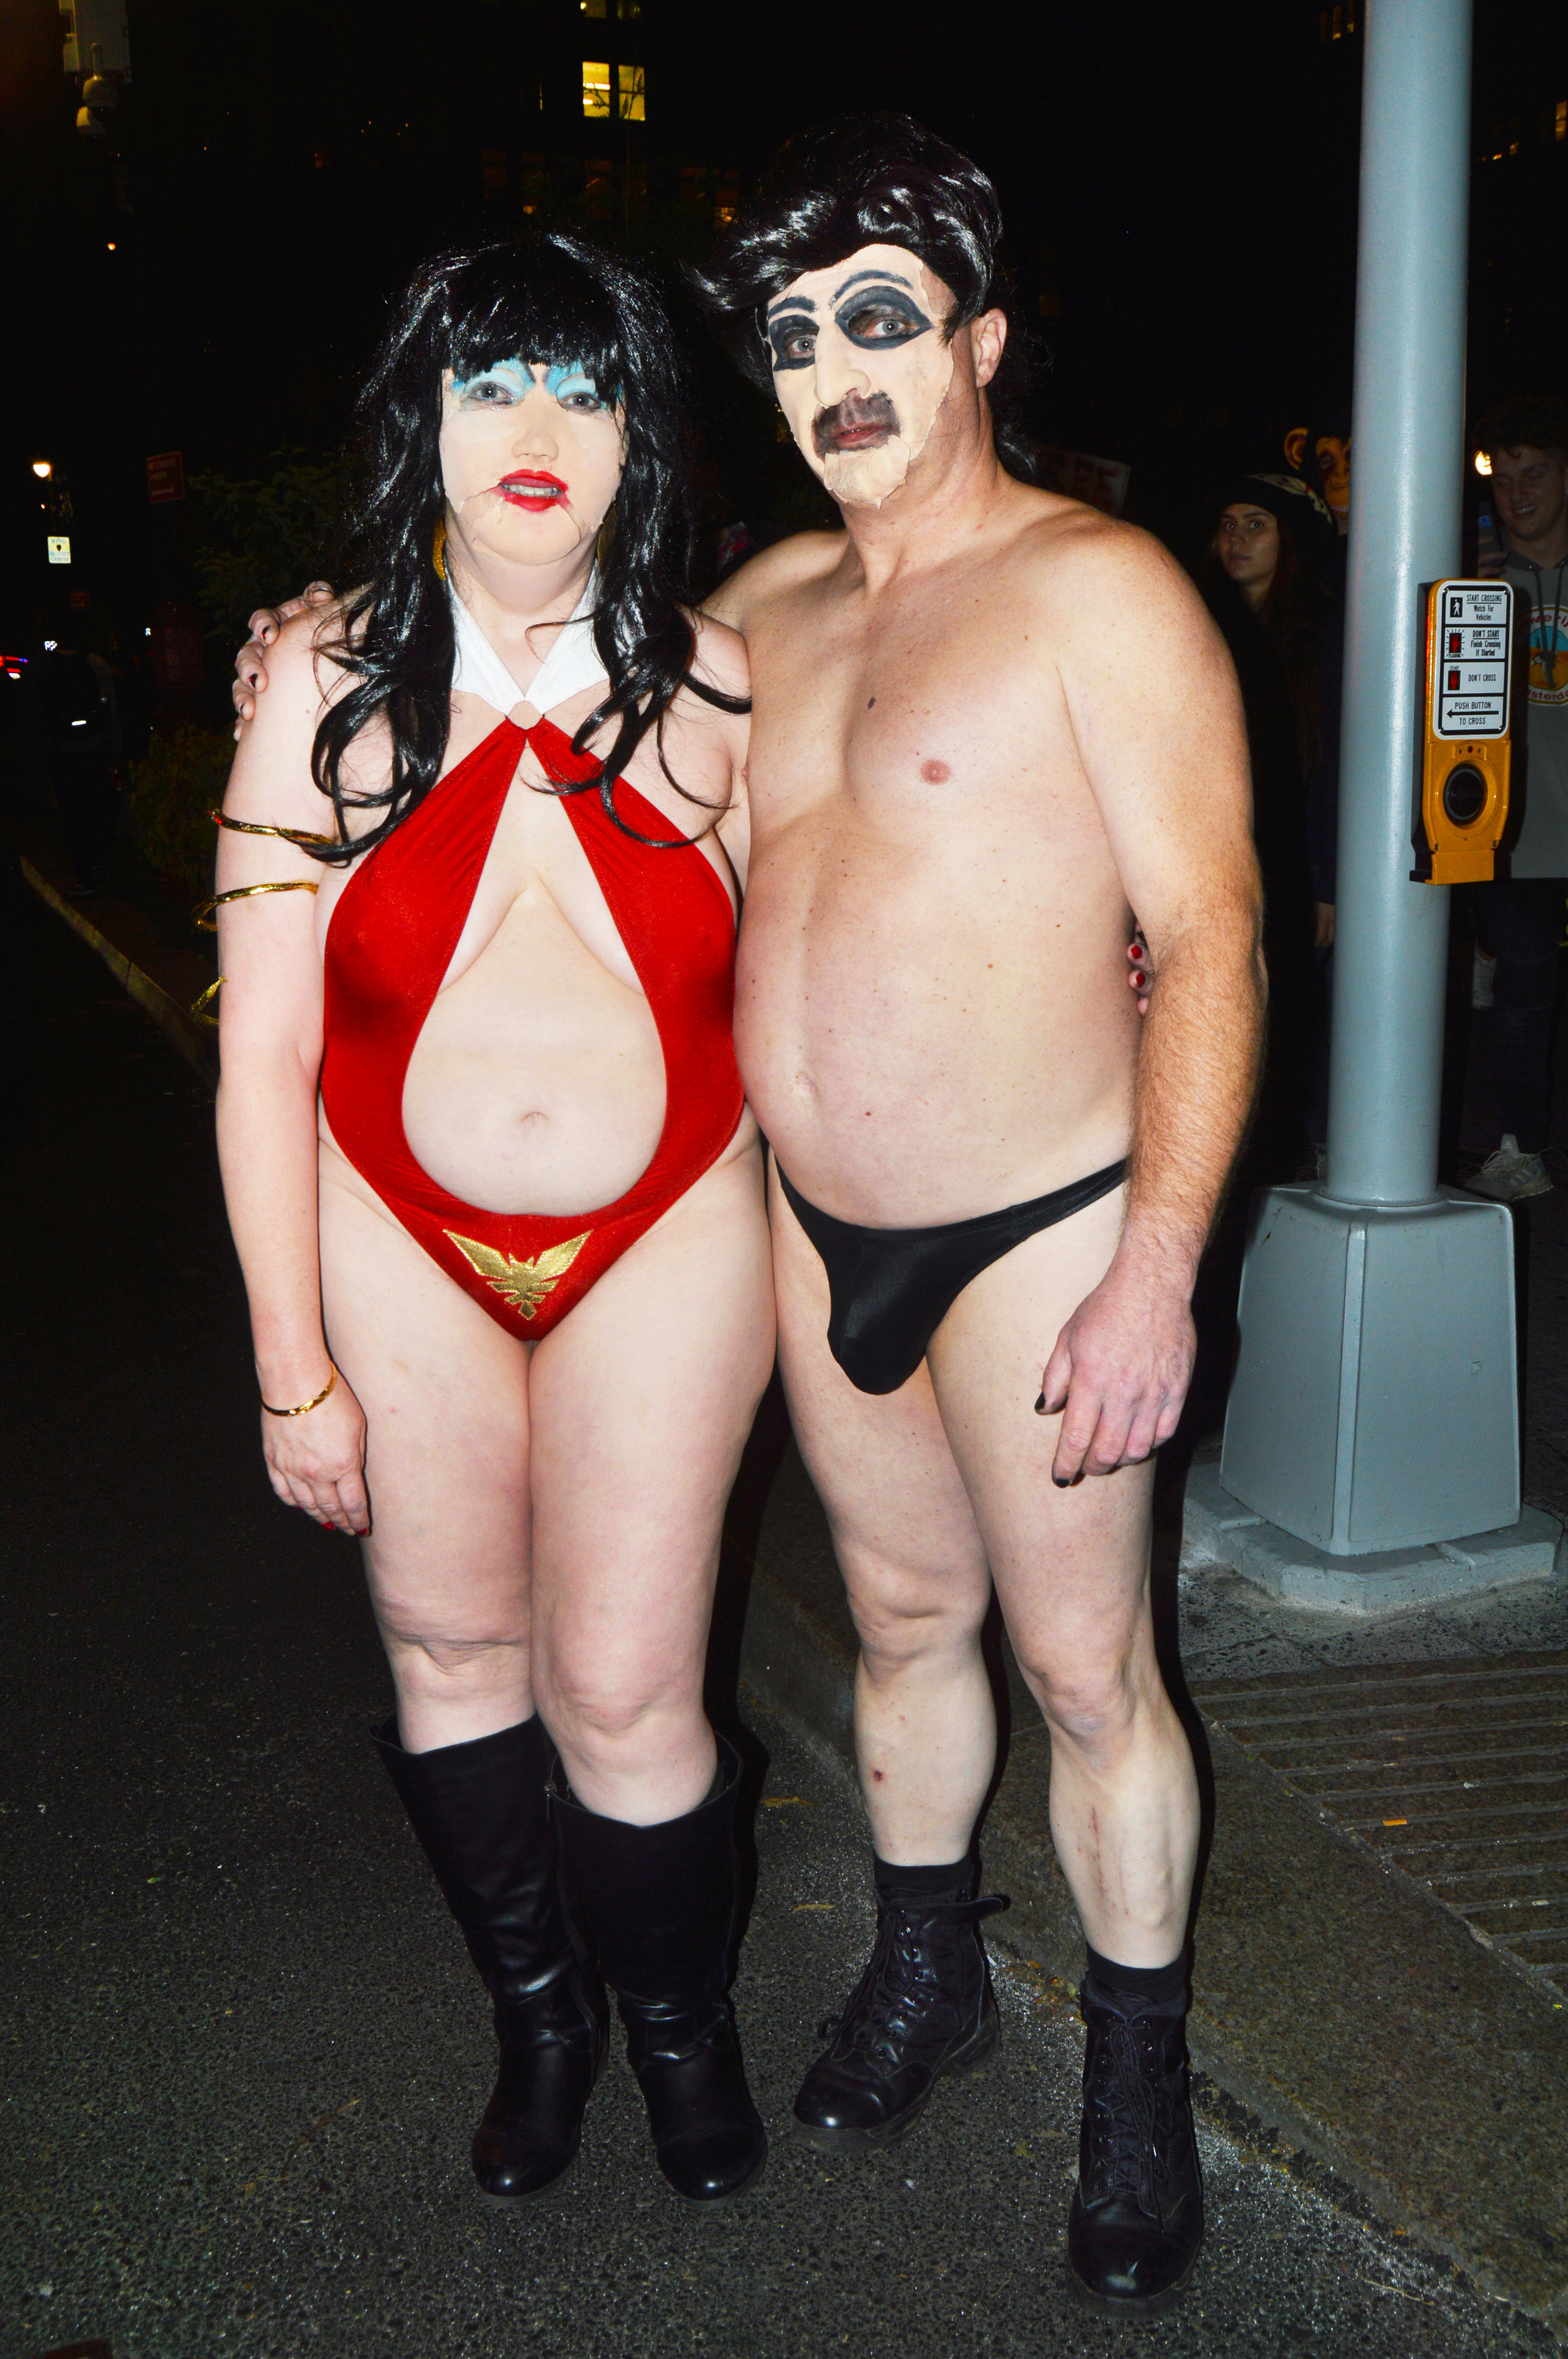  Halloween couple at Union Square.  